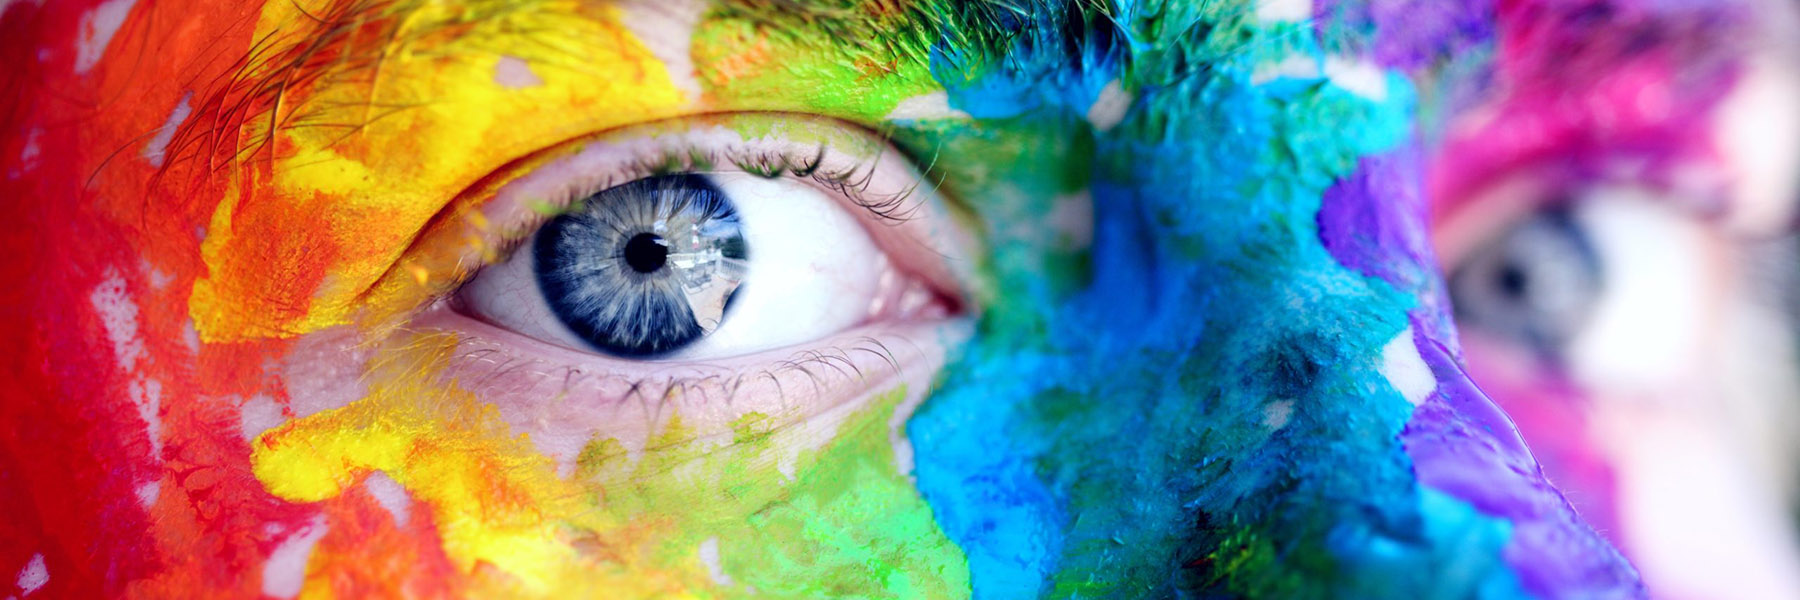 blue-eyed person with rainbow colours painted on their face